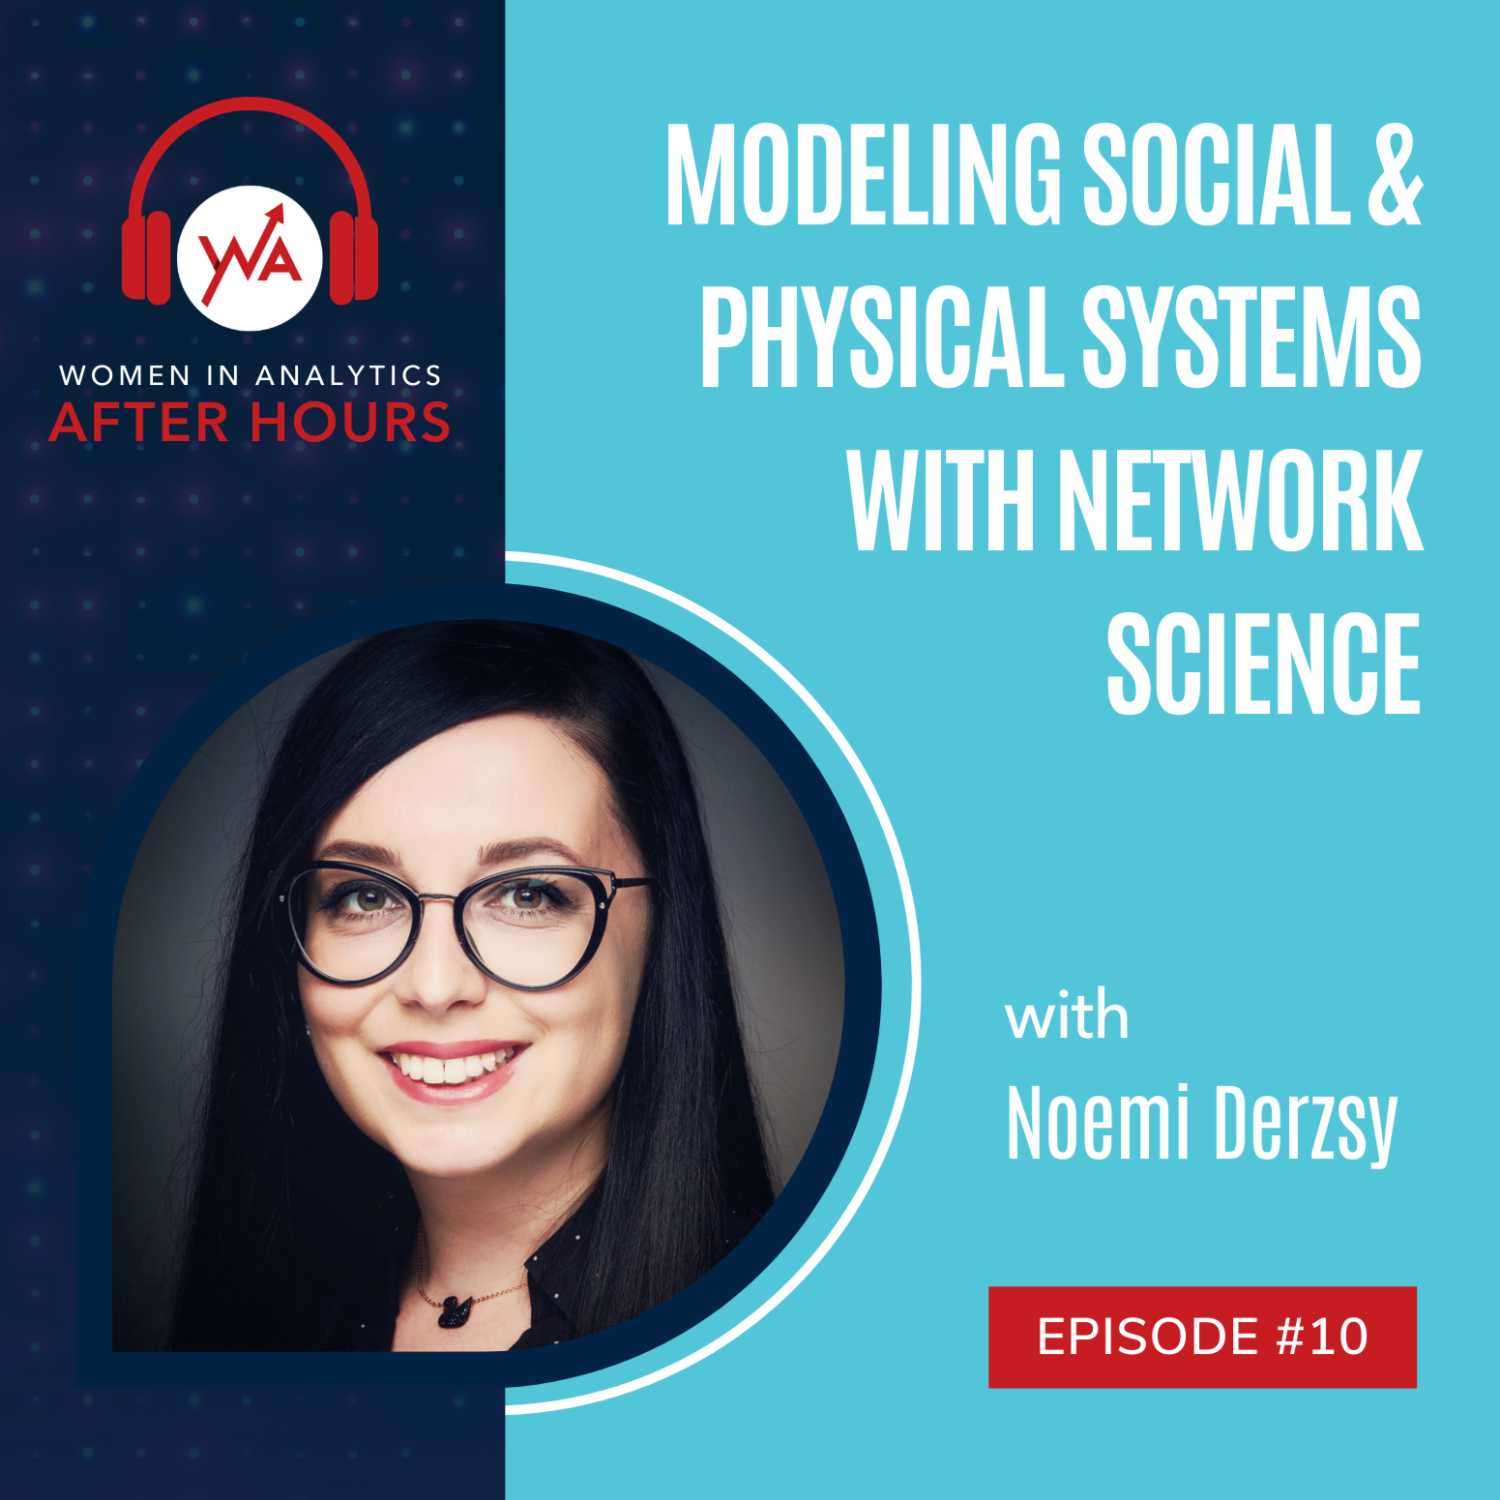 Episode 10: Modeling Social & Physical Systems with Network Science with Noemi Derzsy